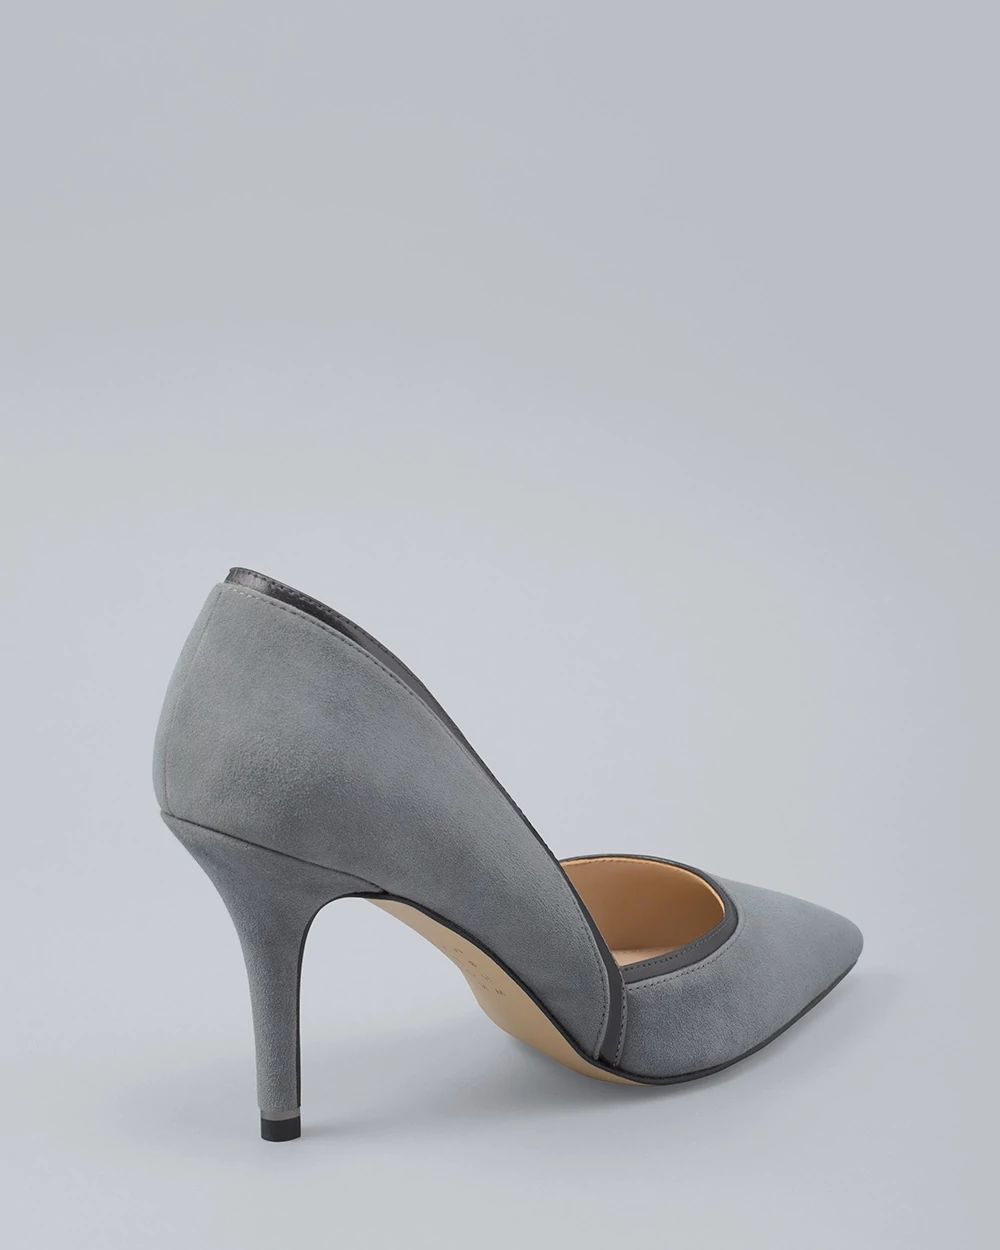 Metallic-Trim Suede Pumps click to view larger image.